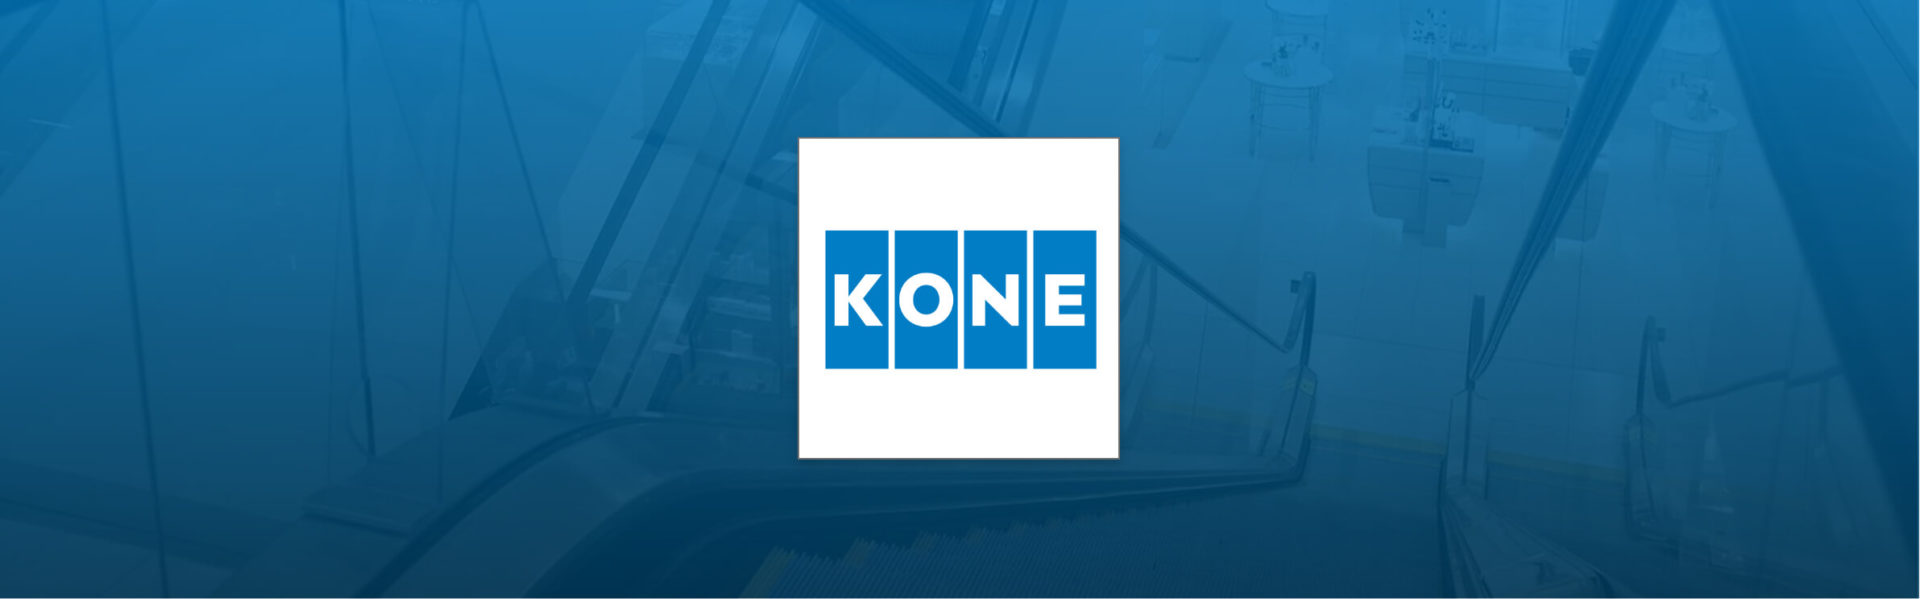 Sourcing promotional products for KONE employee gifts and corporate swag